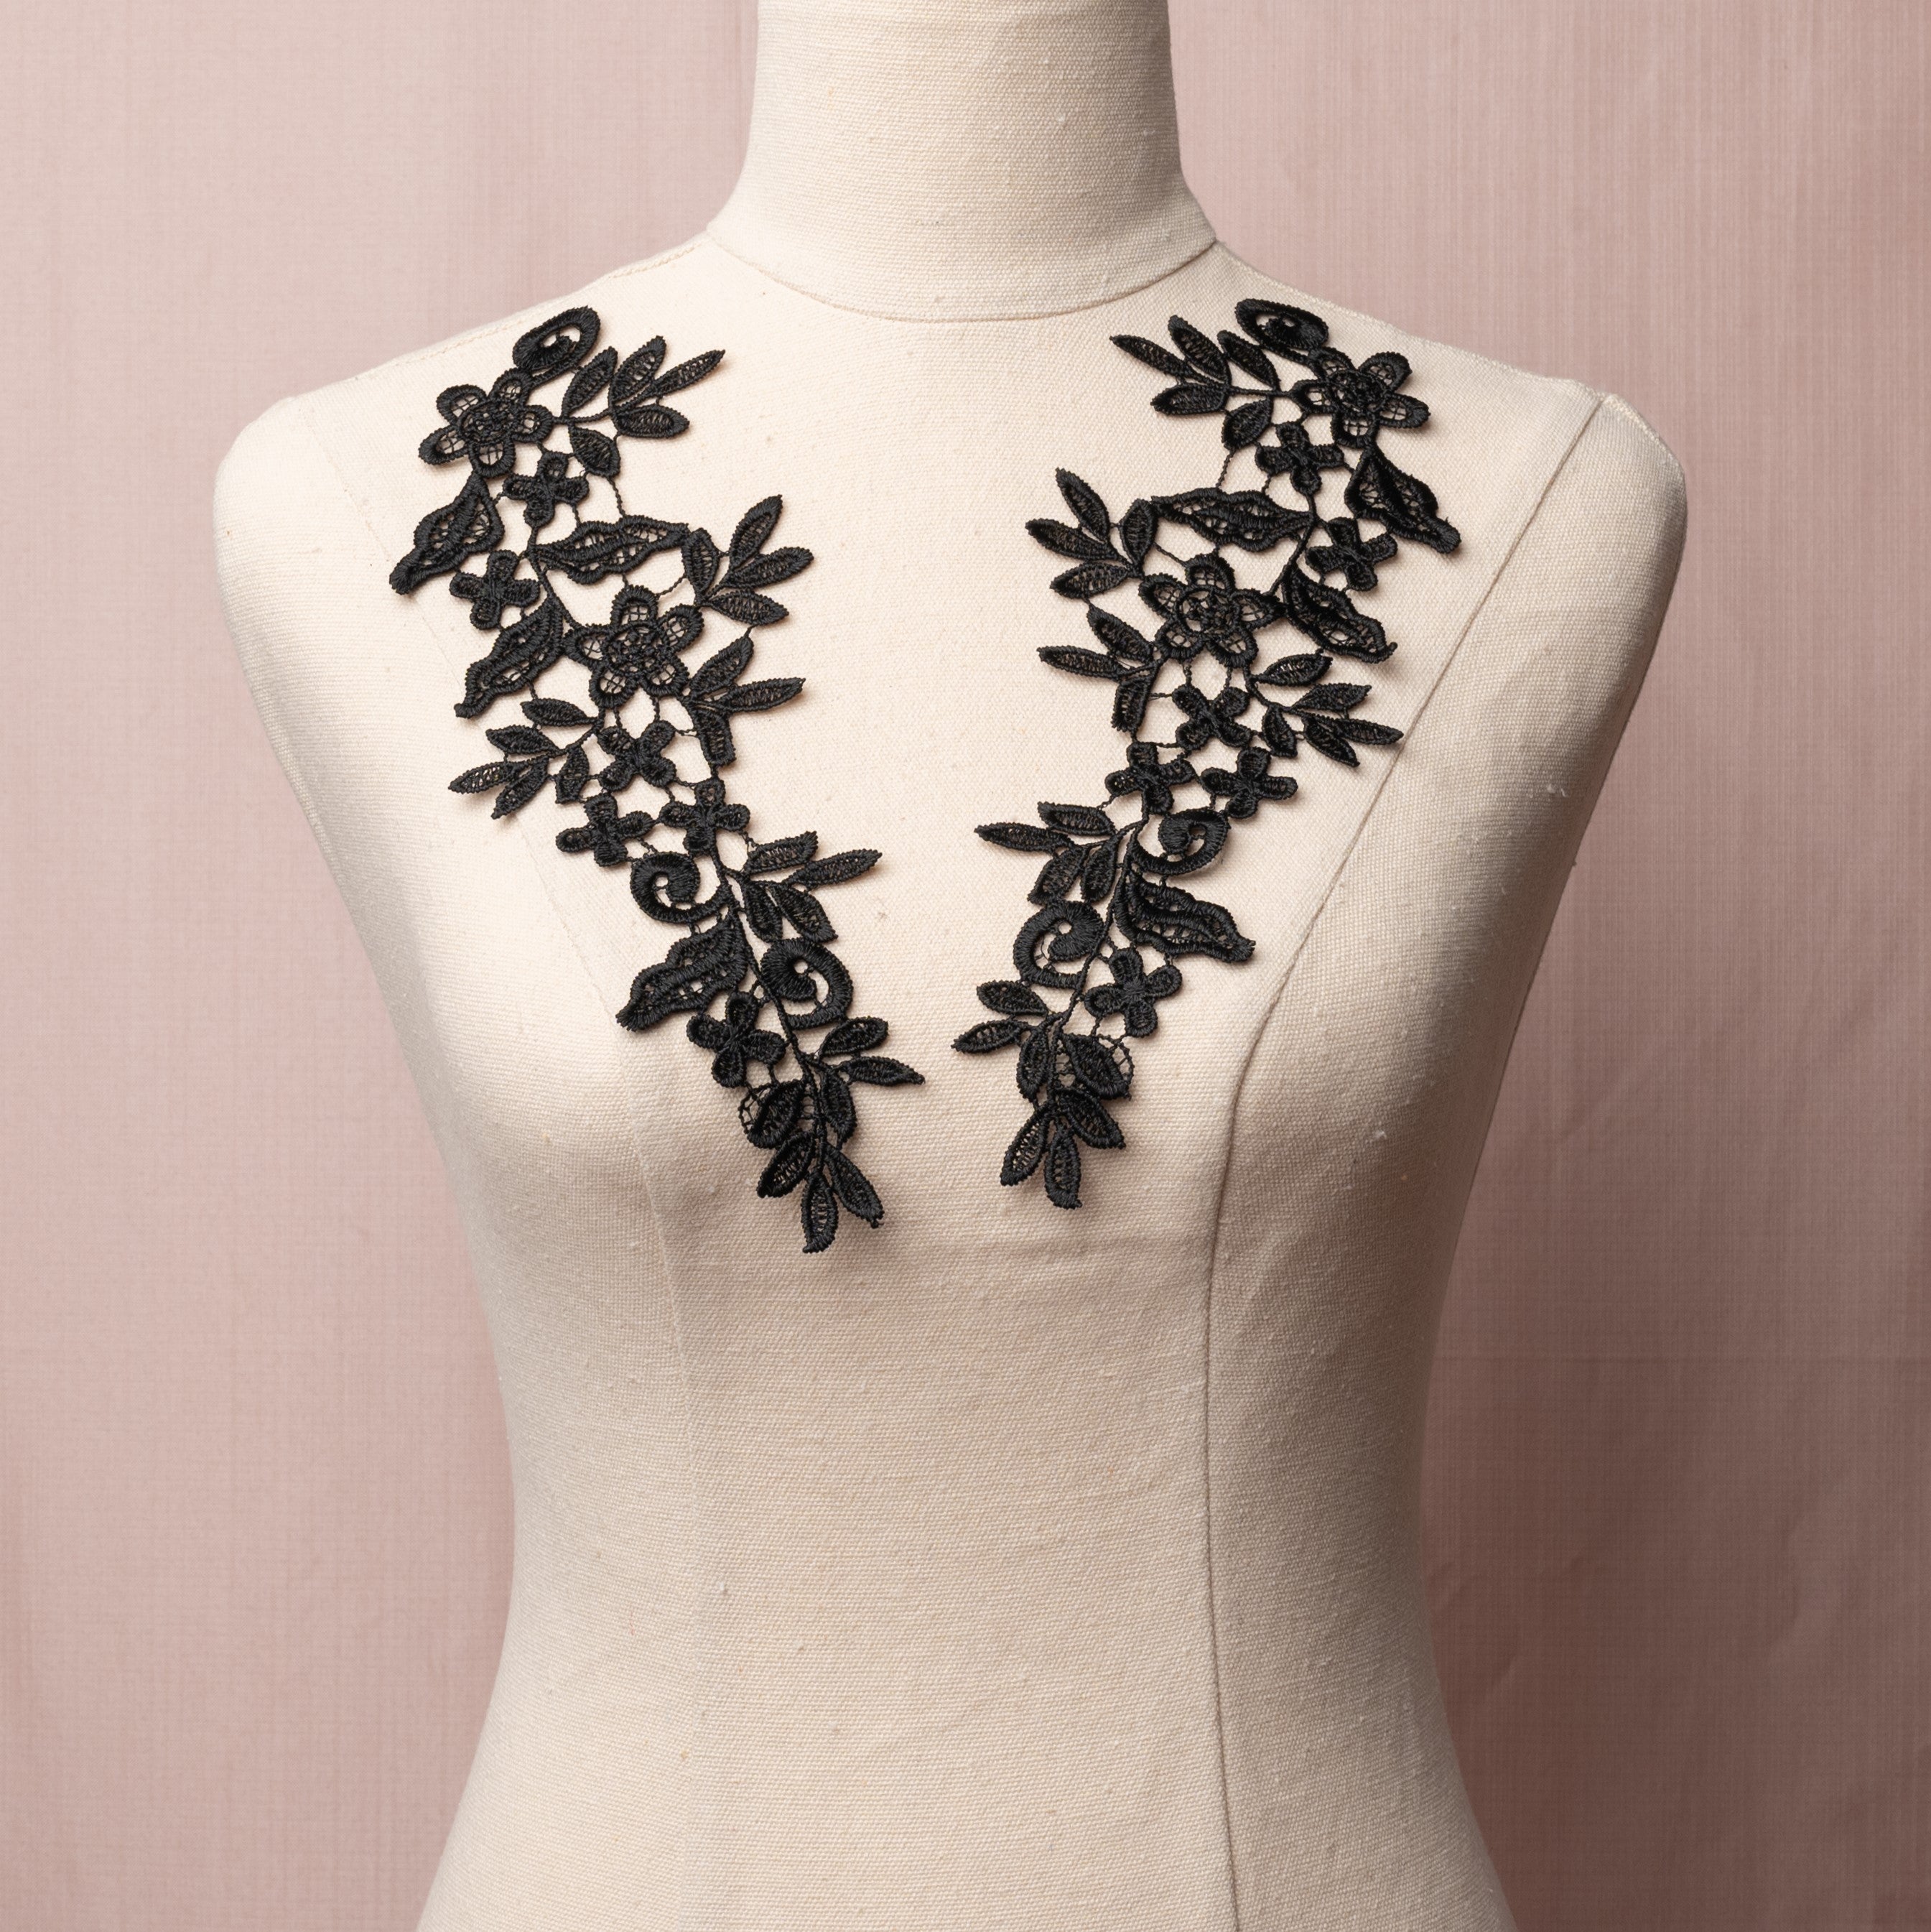 Heavily embroidered black mirrored lace applique pair displayed on a mannequin.